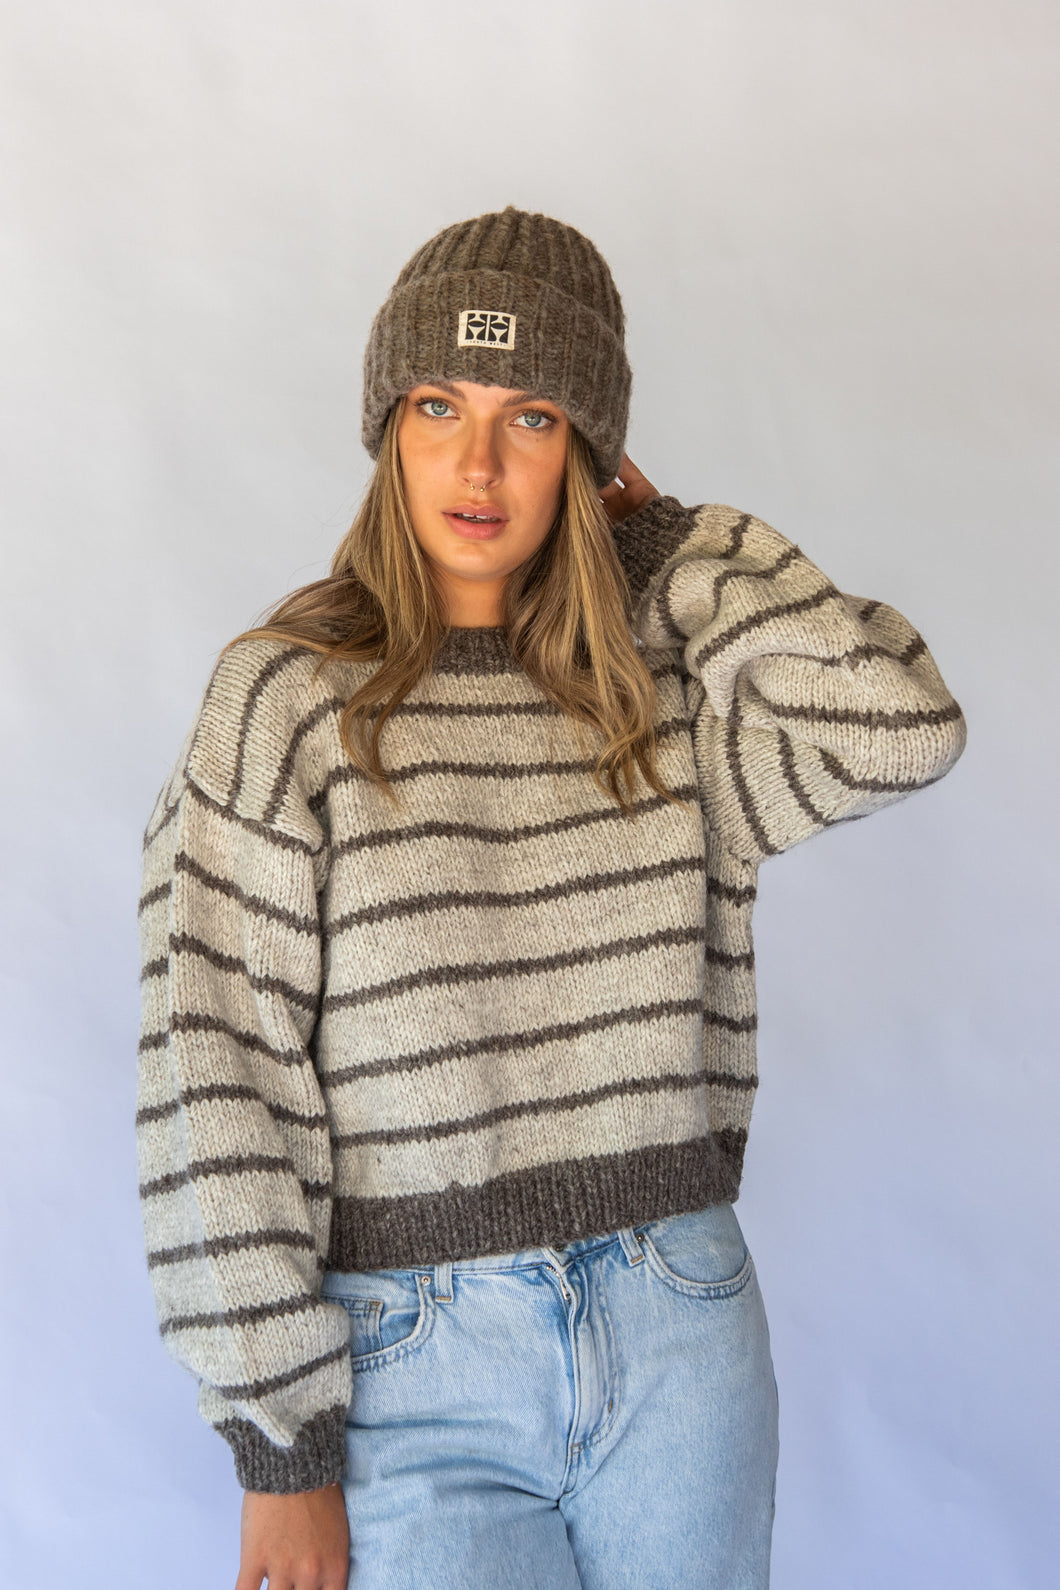 Hand Made Bande Sweater in Birch from Hobo and Hatch